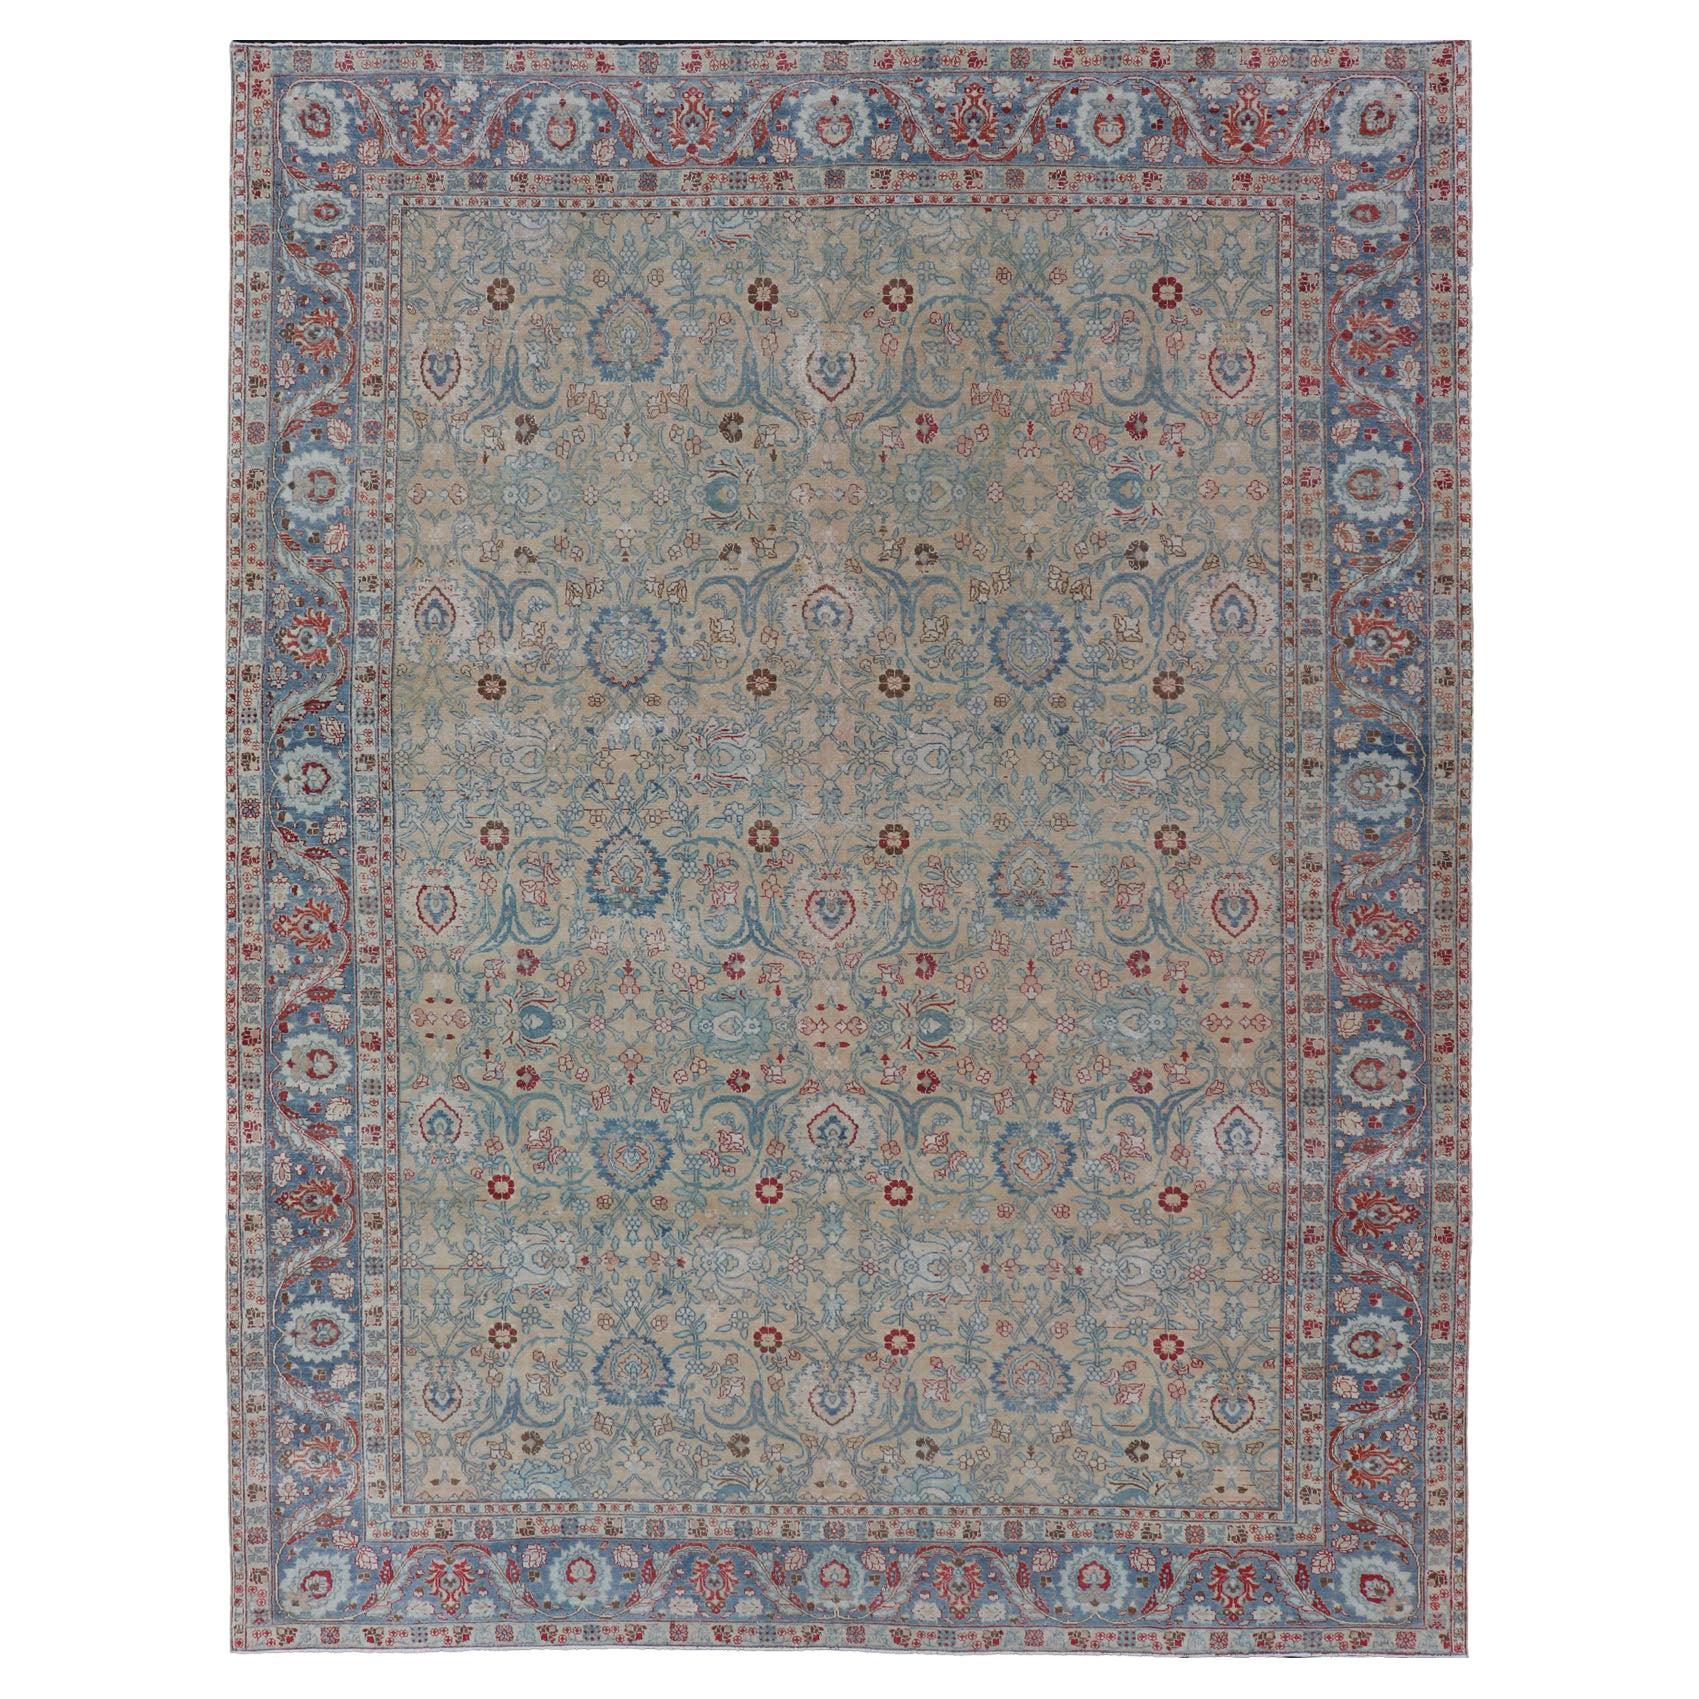  Antique Persian Khorassan Rug with Floral Design in Honey Cream & Dusty Blue For Sale